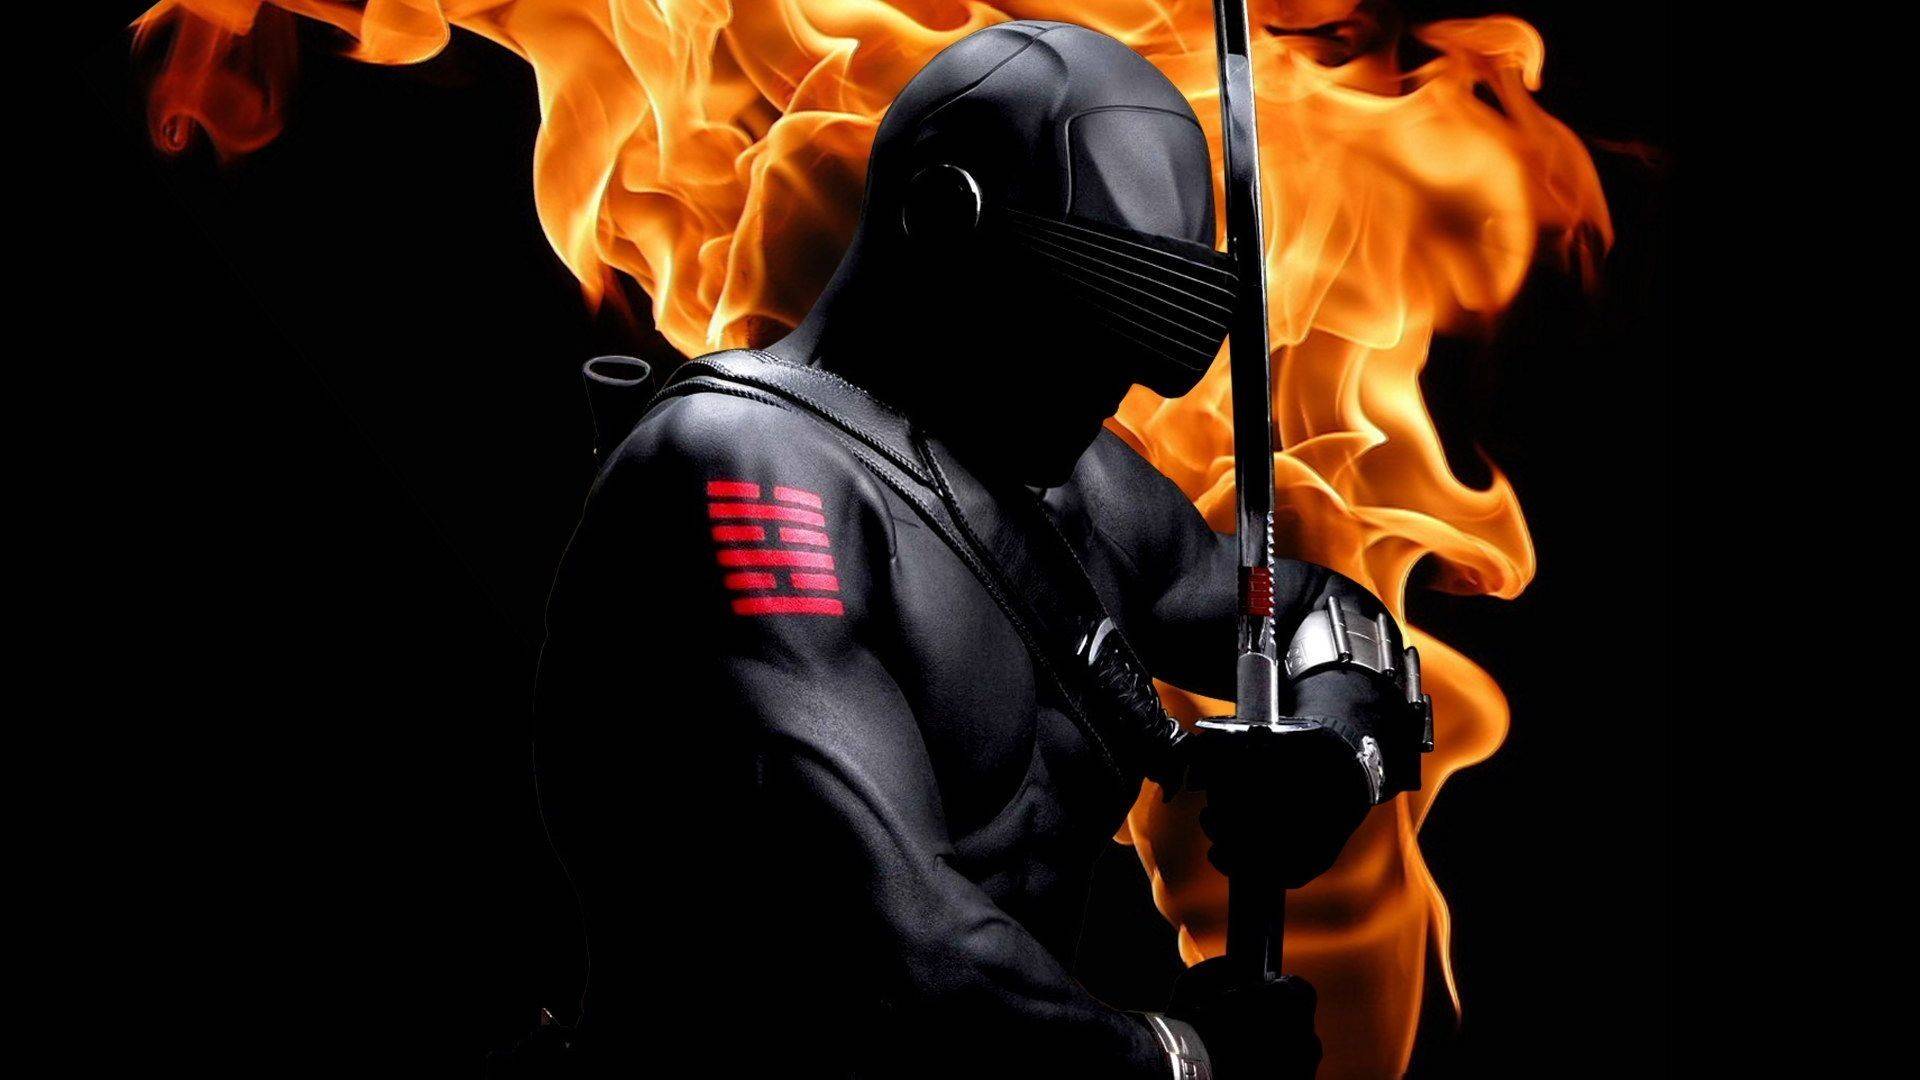 Snake Eyes GI Joe with sword on fire   Wallpapers Picture 1920x1080